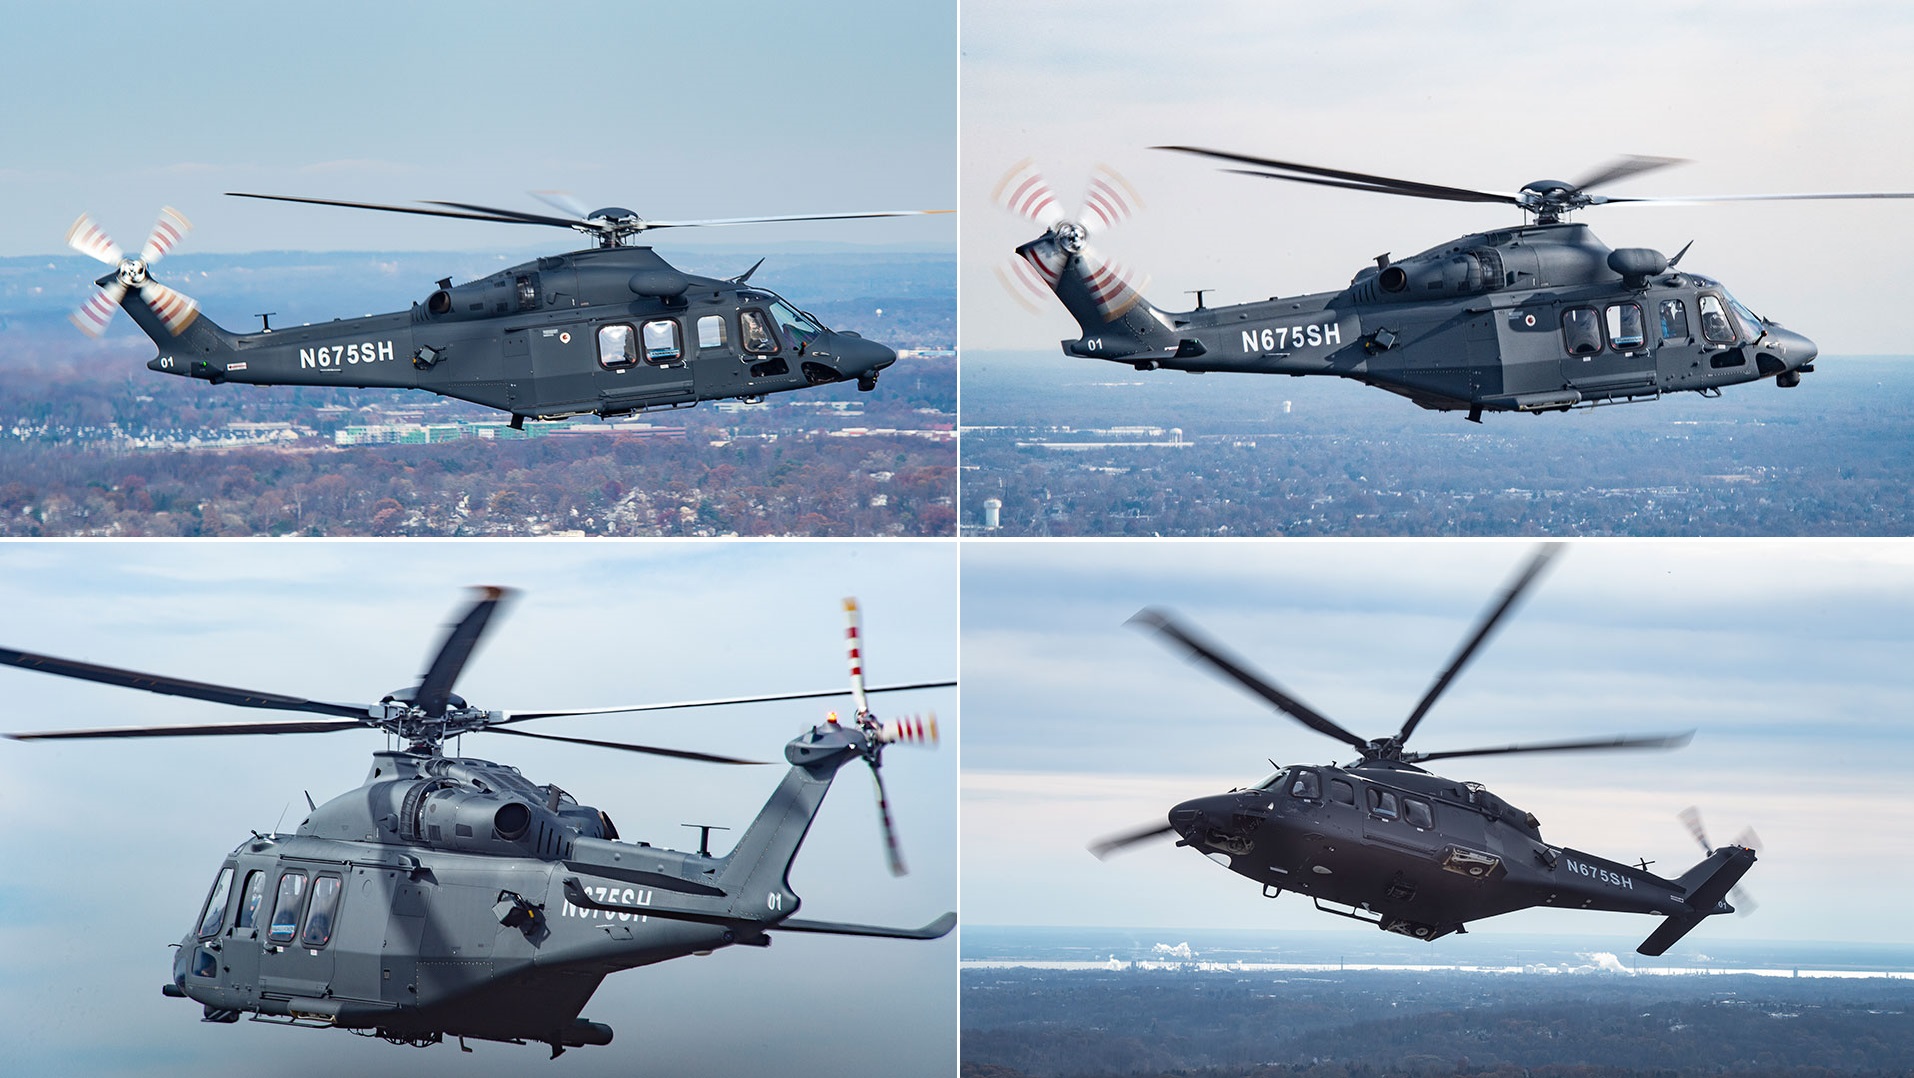 Leonardo and Boeing deliver MH-139A Grey Wolf test helicopters to the U.S. Air Force for the first time under a $2.4 billion contract